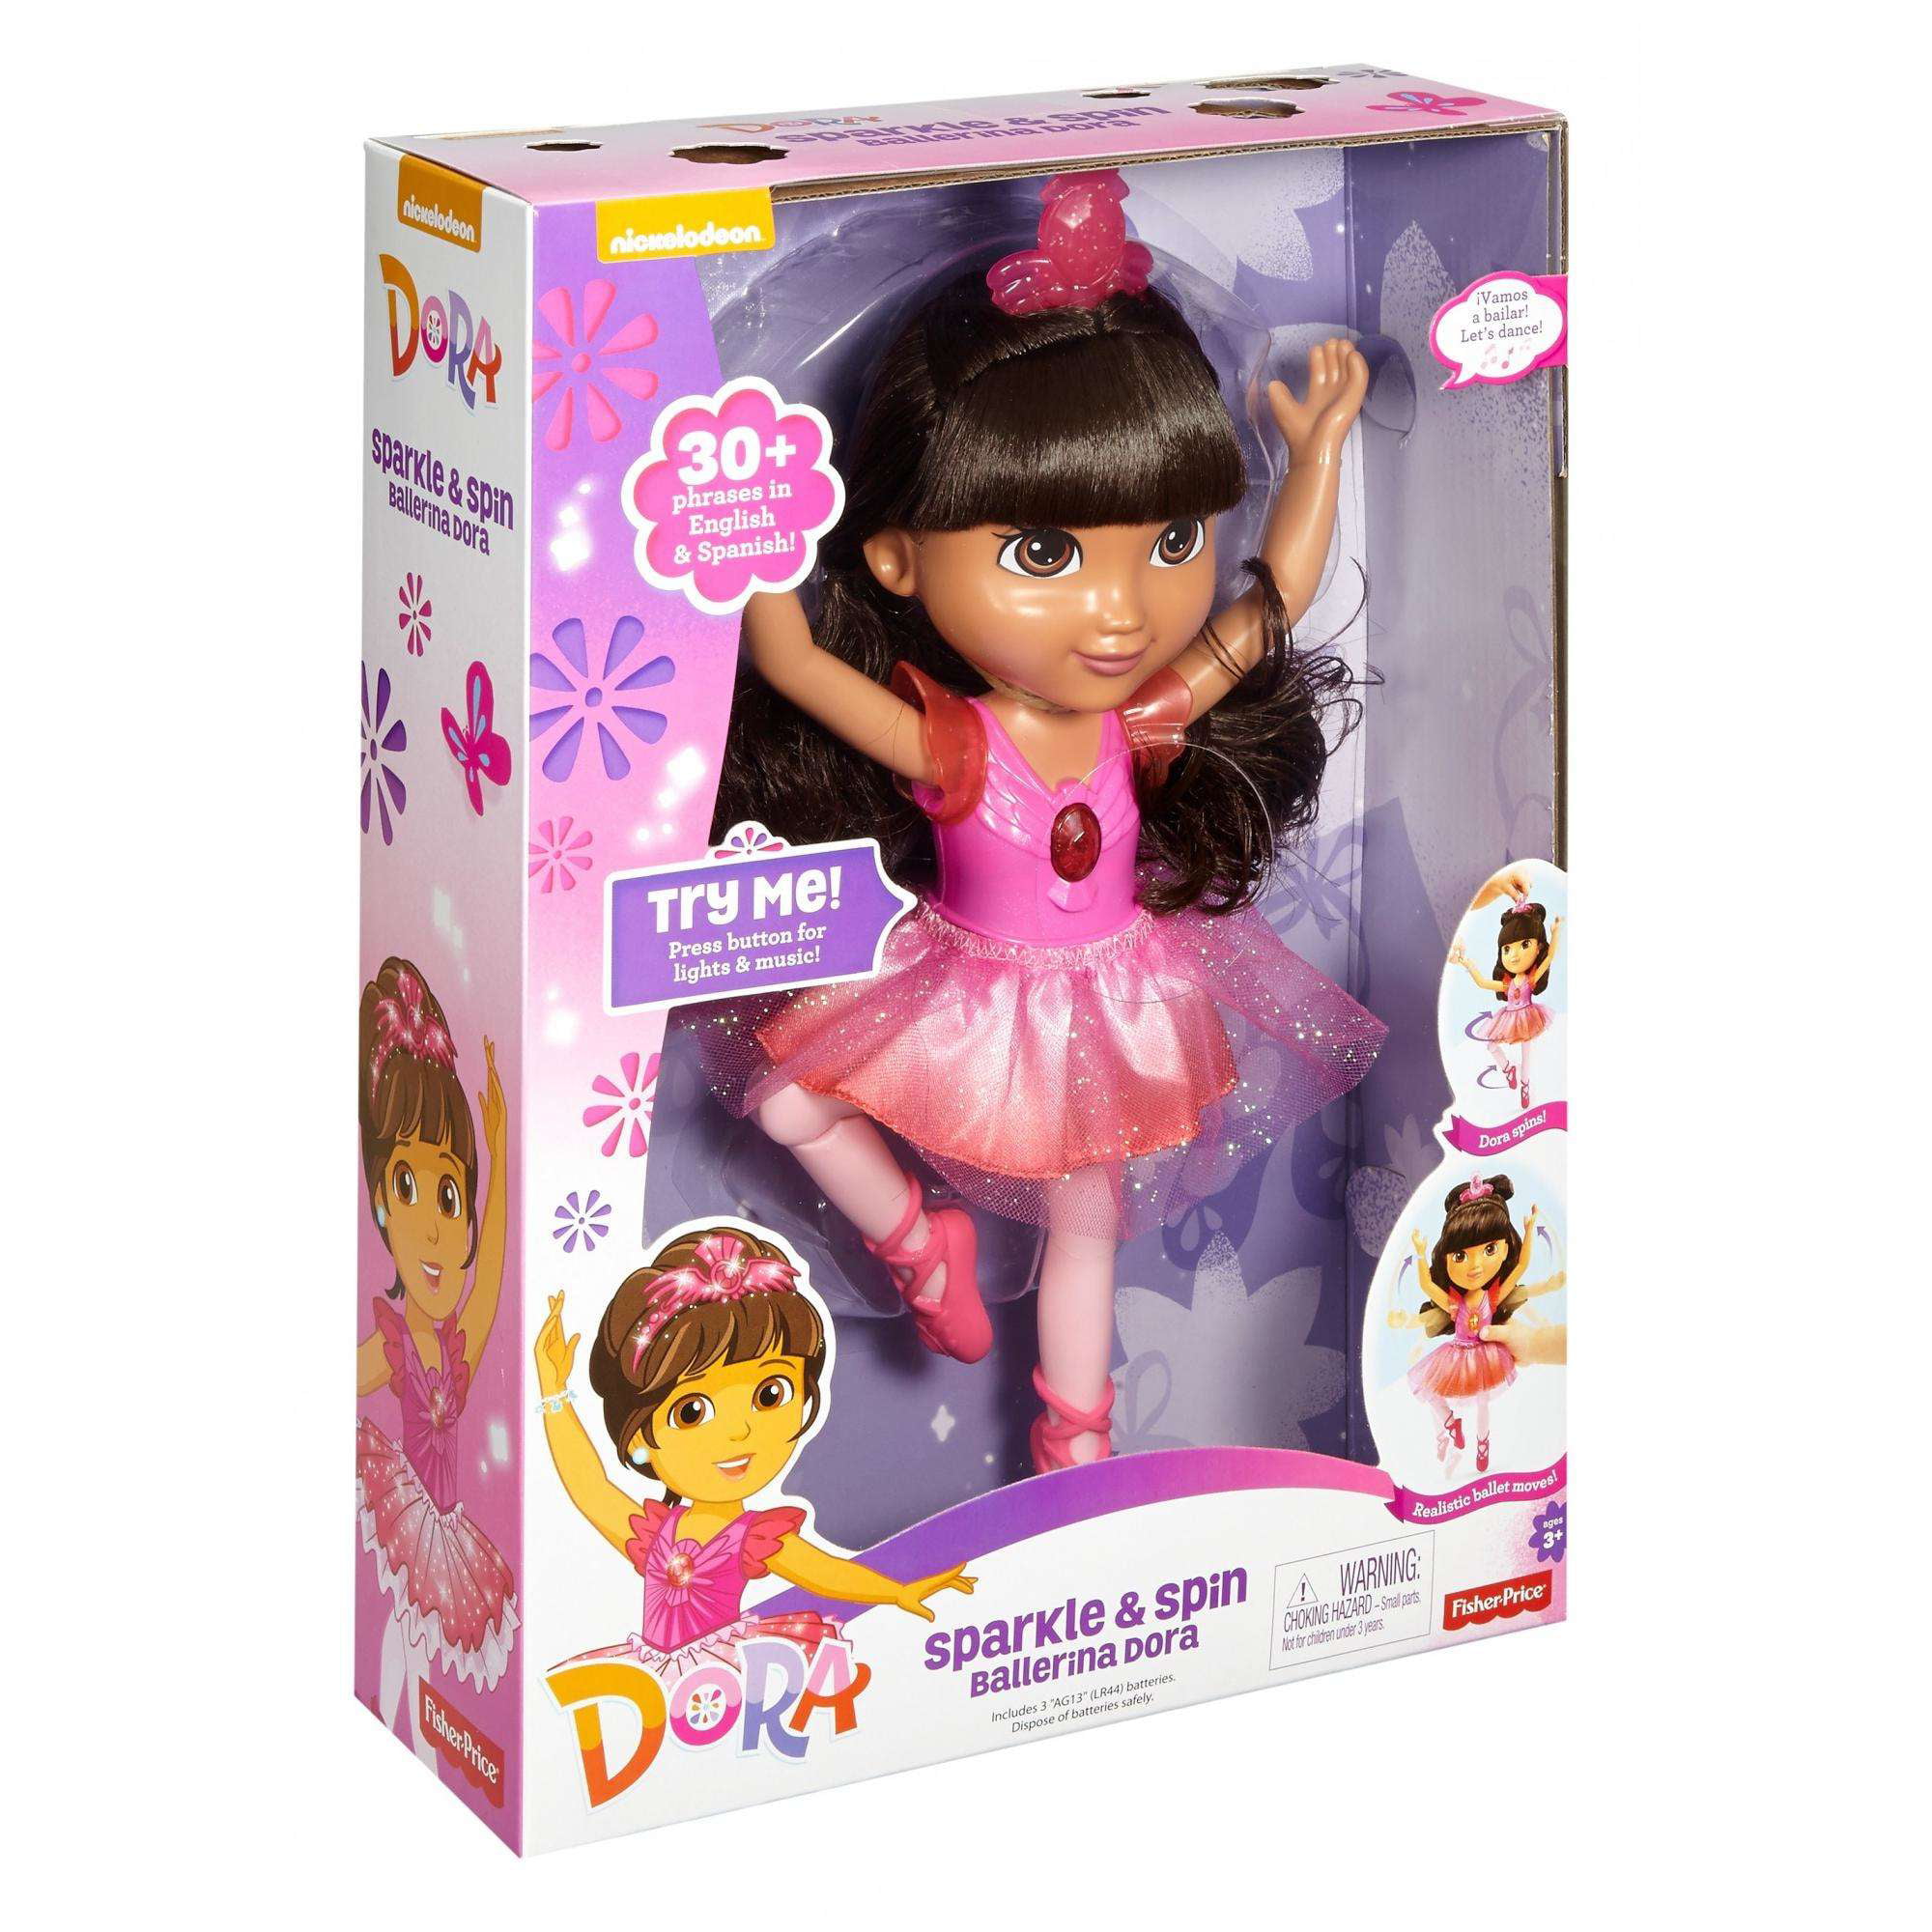 Dora Ballerina Doll on Sale, UP TO 56% OFF www.encuentroguionistas.com.